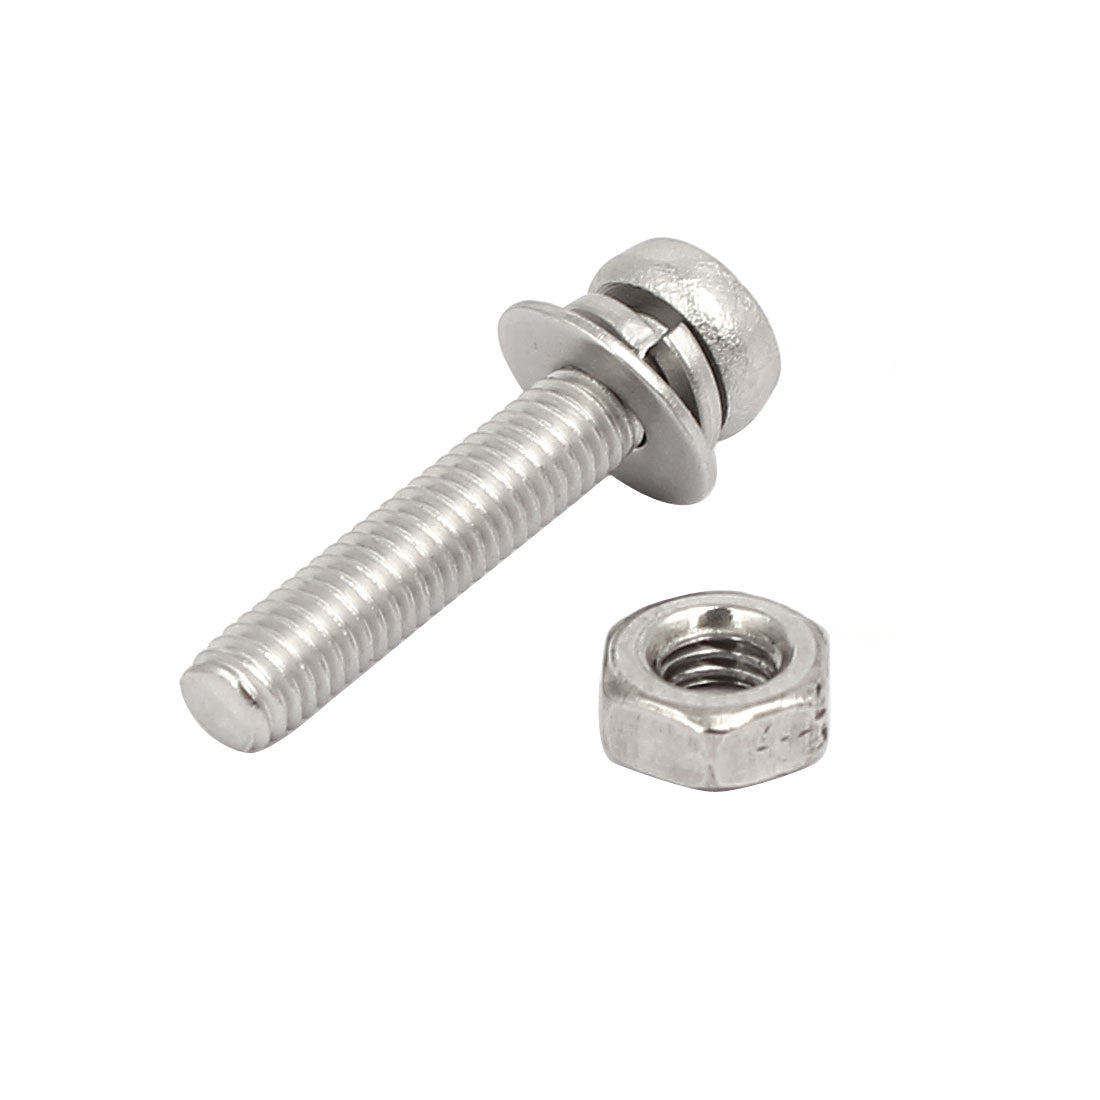 uxcell Uxcell M3x16mm 304 Stainless Steel Phillips Pan Head Bolt Screw Nut w Washer 45 Sets